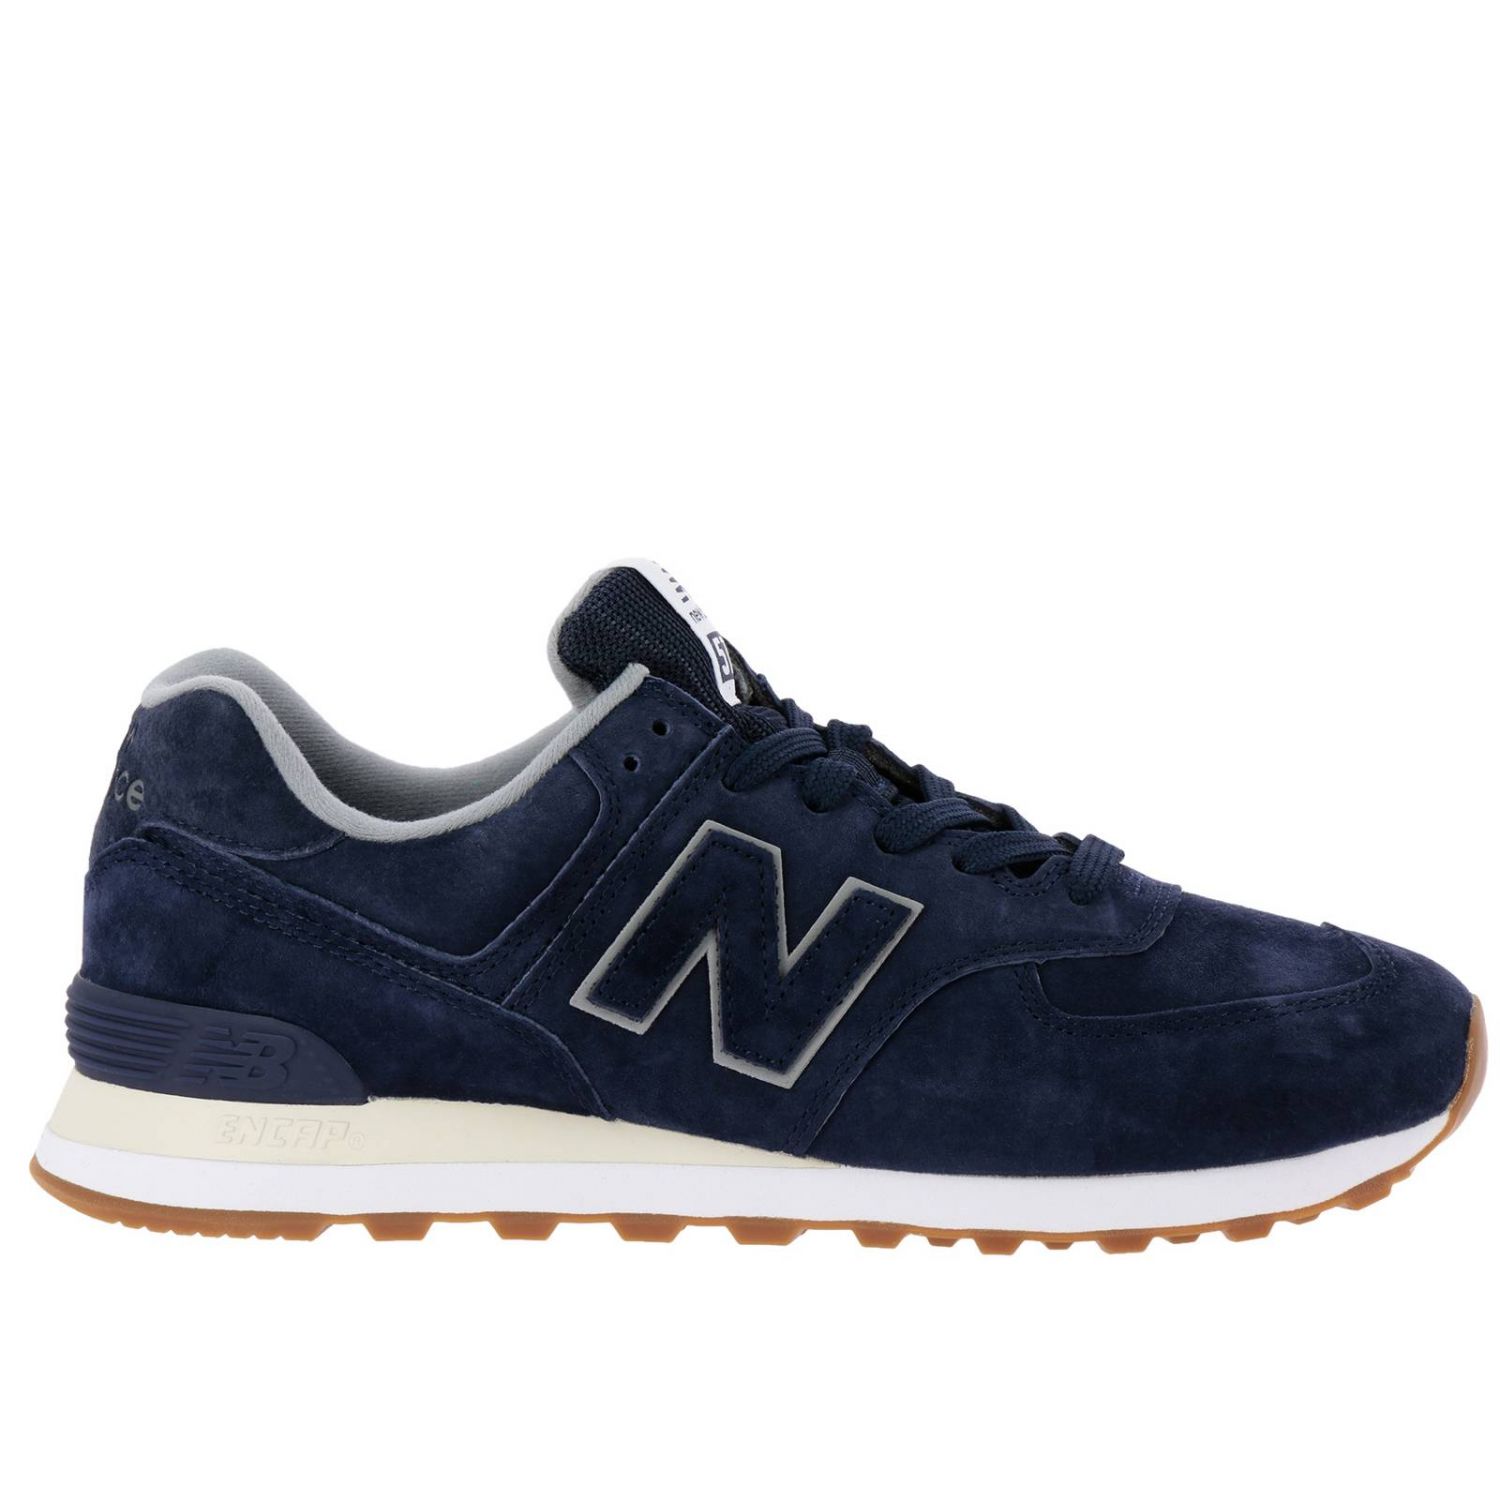 New Balance Outlet: Shoes men - Blue | Sneakers New Balance ML574EPA ...